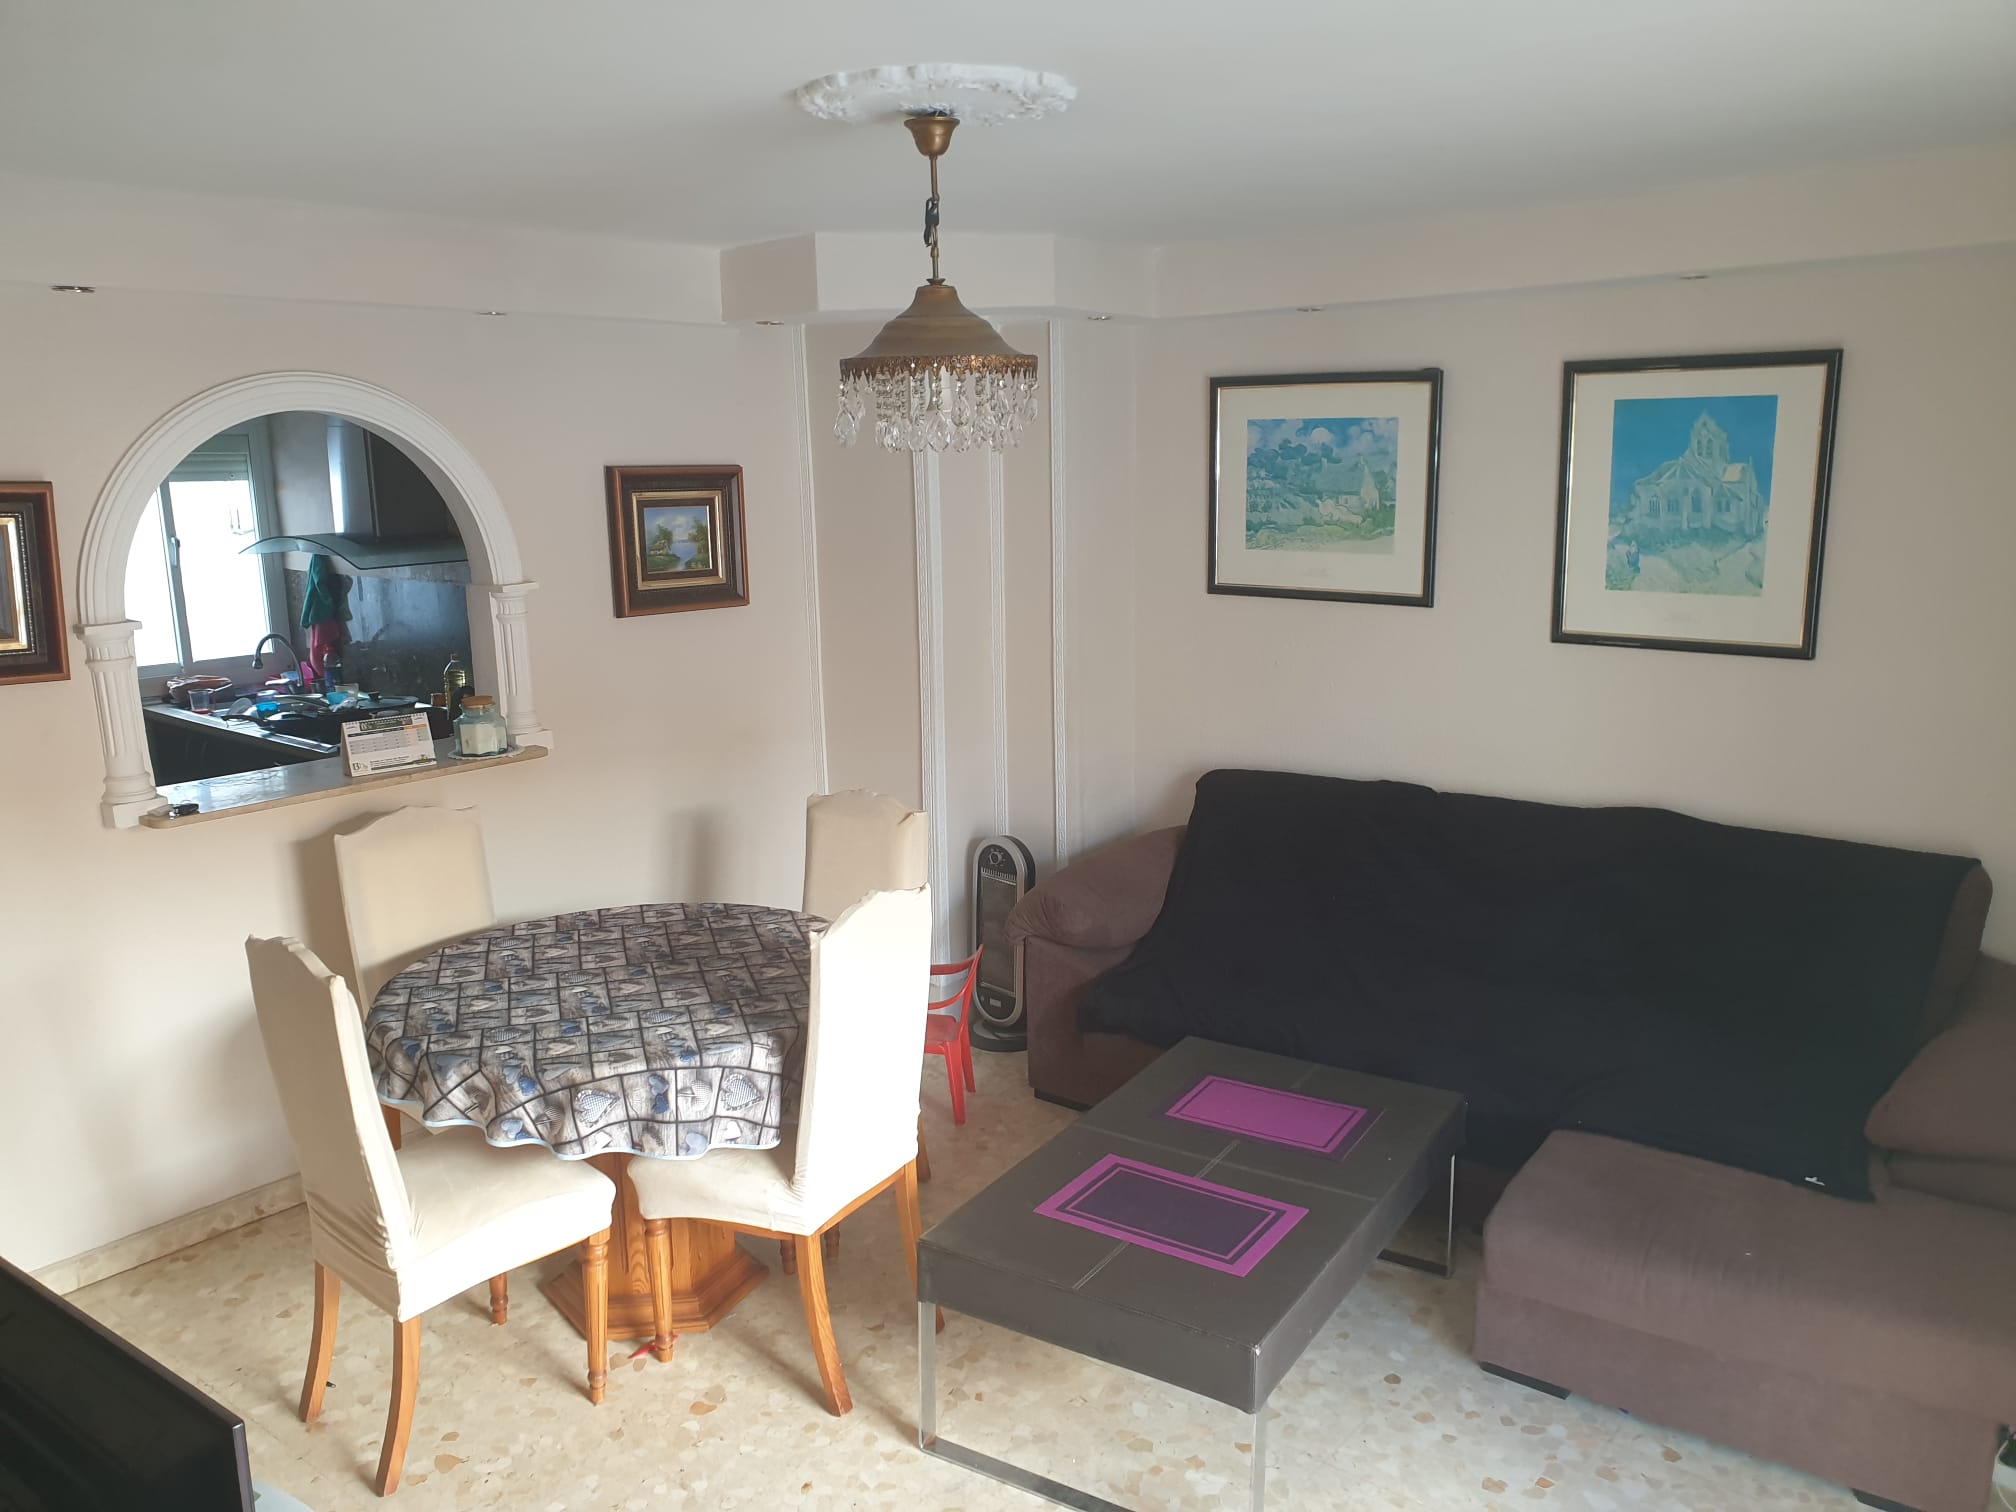 3 bedroom duplex penthouse for rent in the center of Estepona - thumb - mibgroup.es